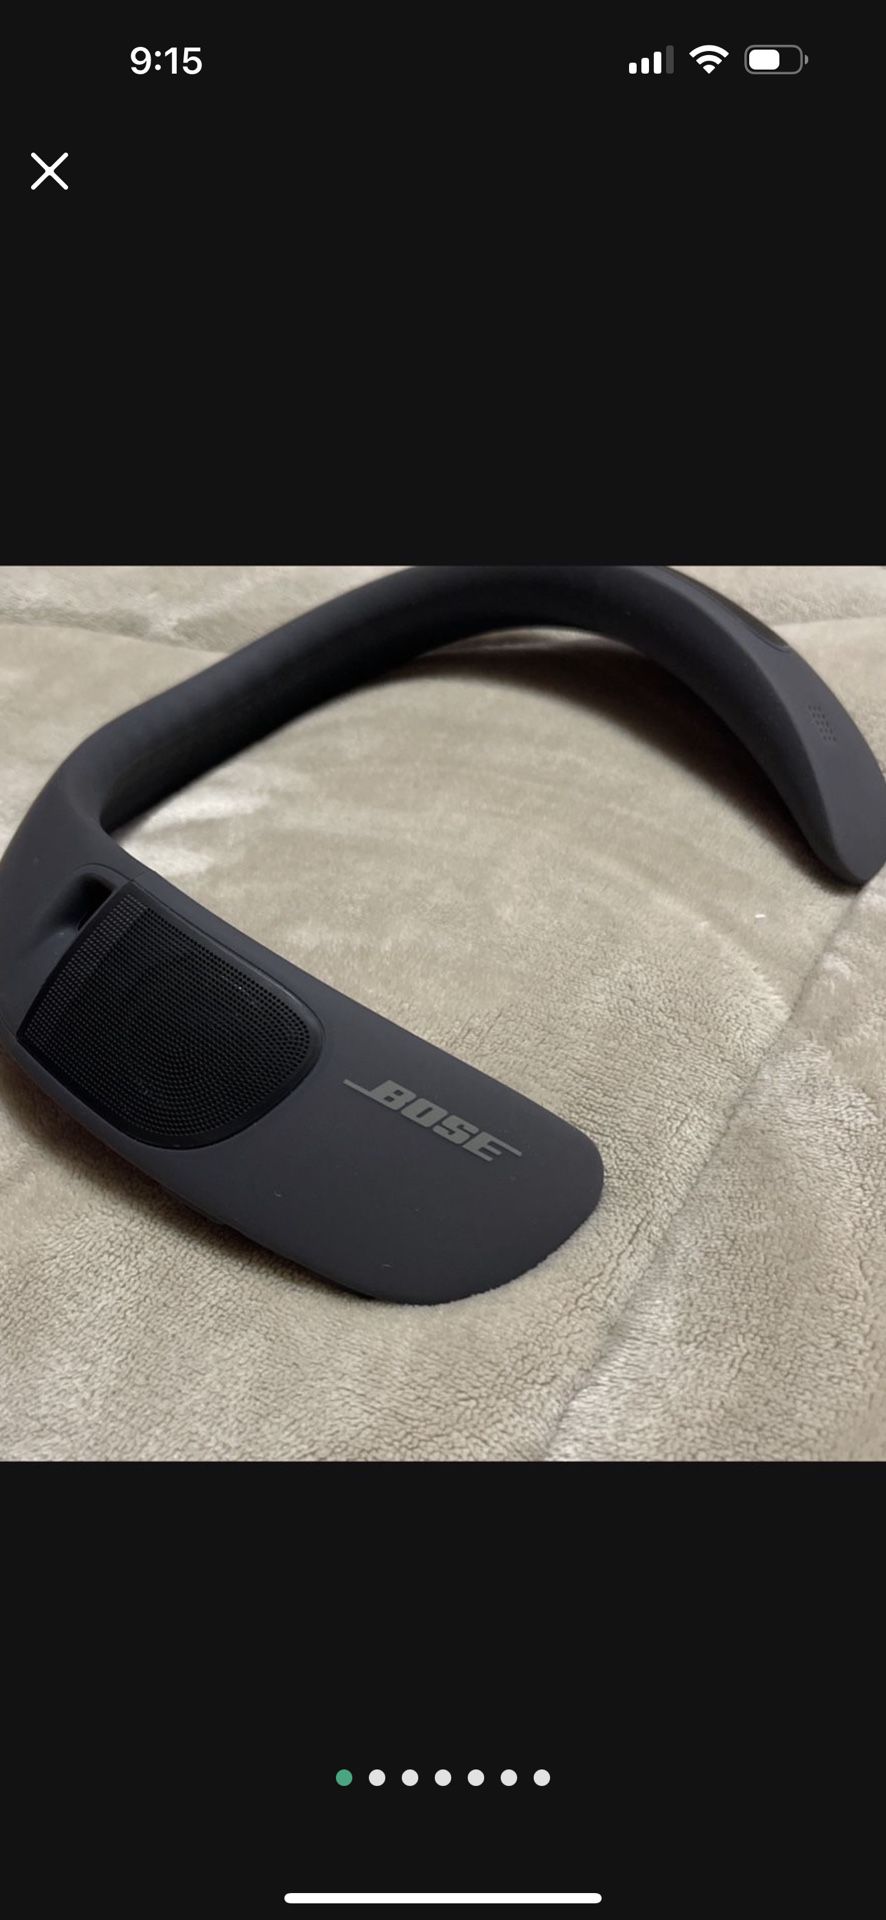 Bose Soundwear Companion Wireless Wearable Speaker - Black do not waste my time. Text me if you are ready to buy.